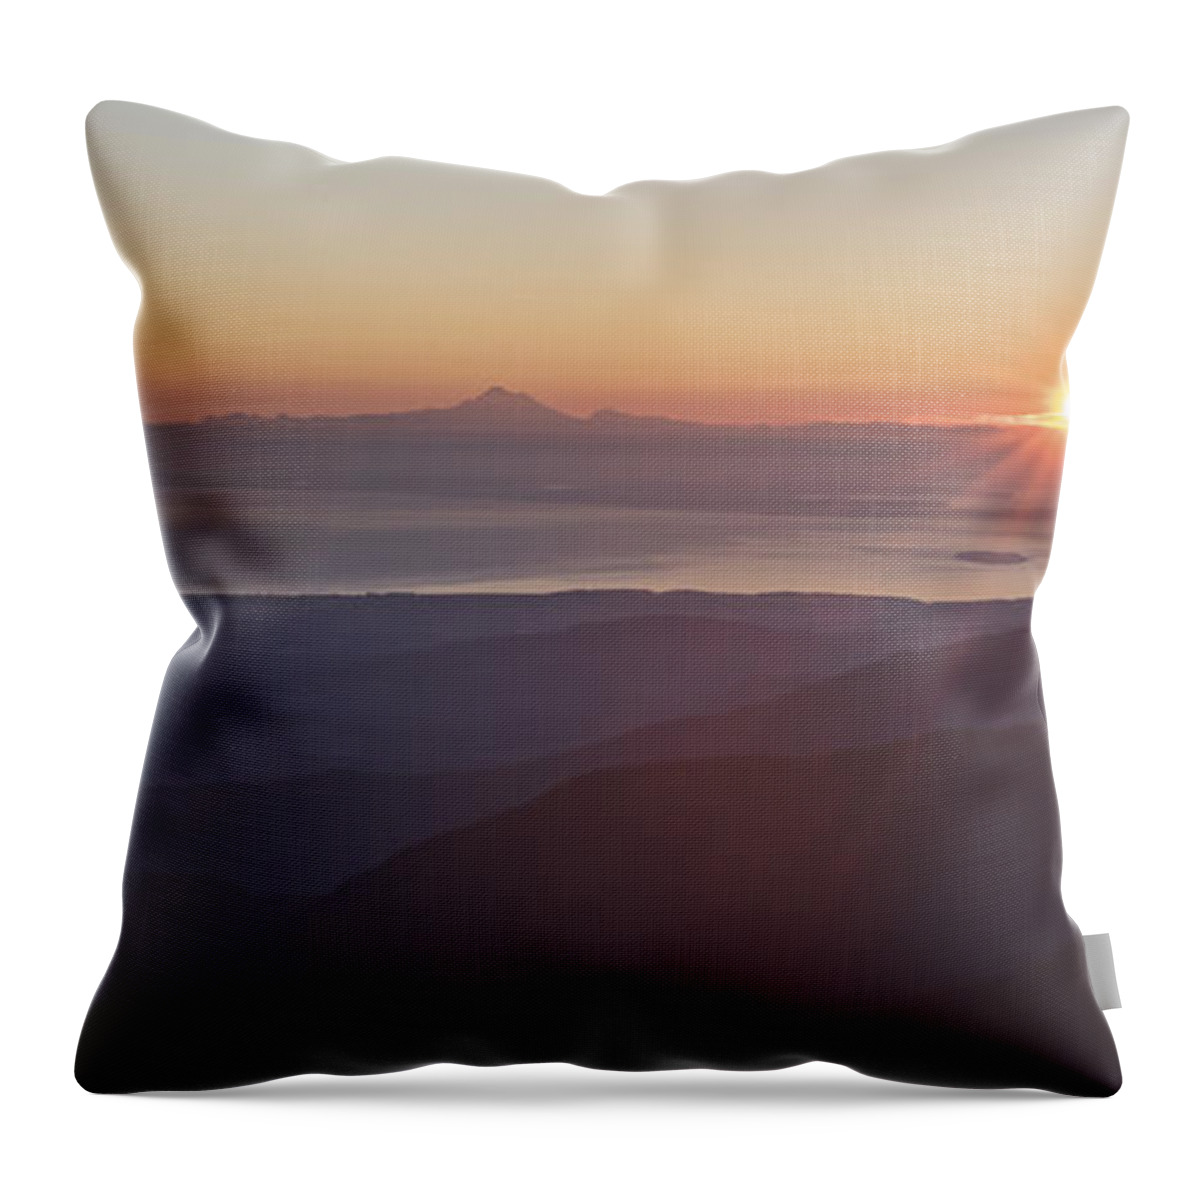 Art Throw Pillow featuring the photograph Every Morning by Jon Glaser